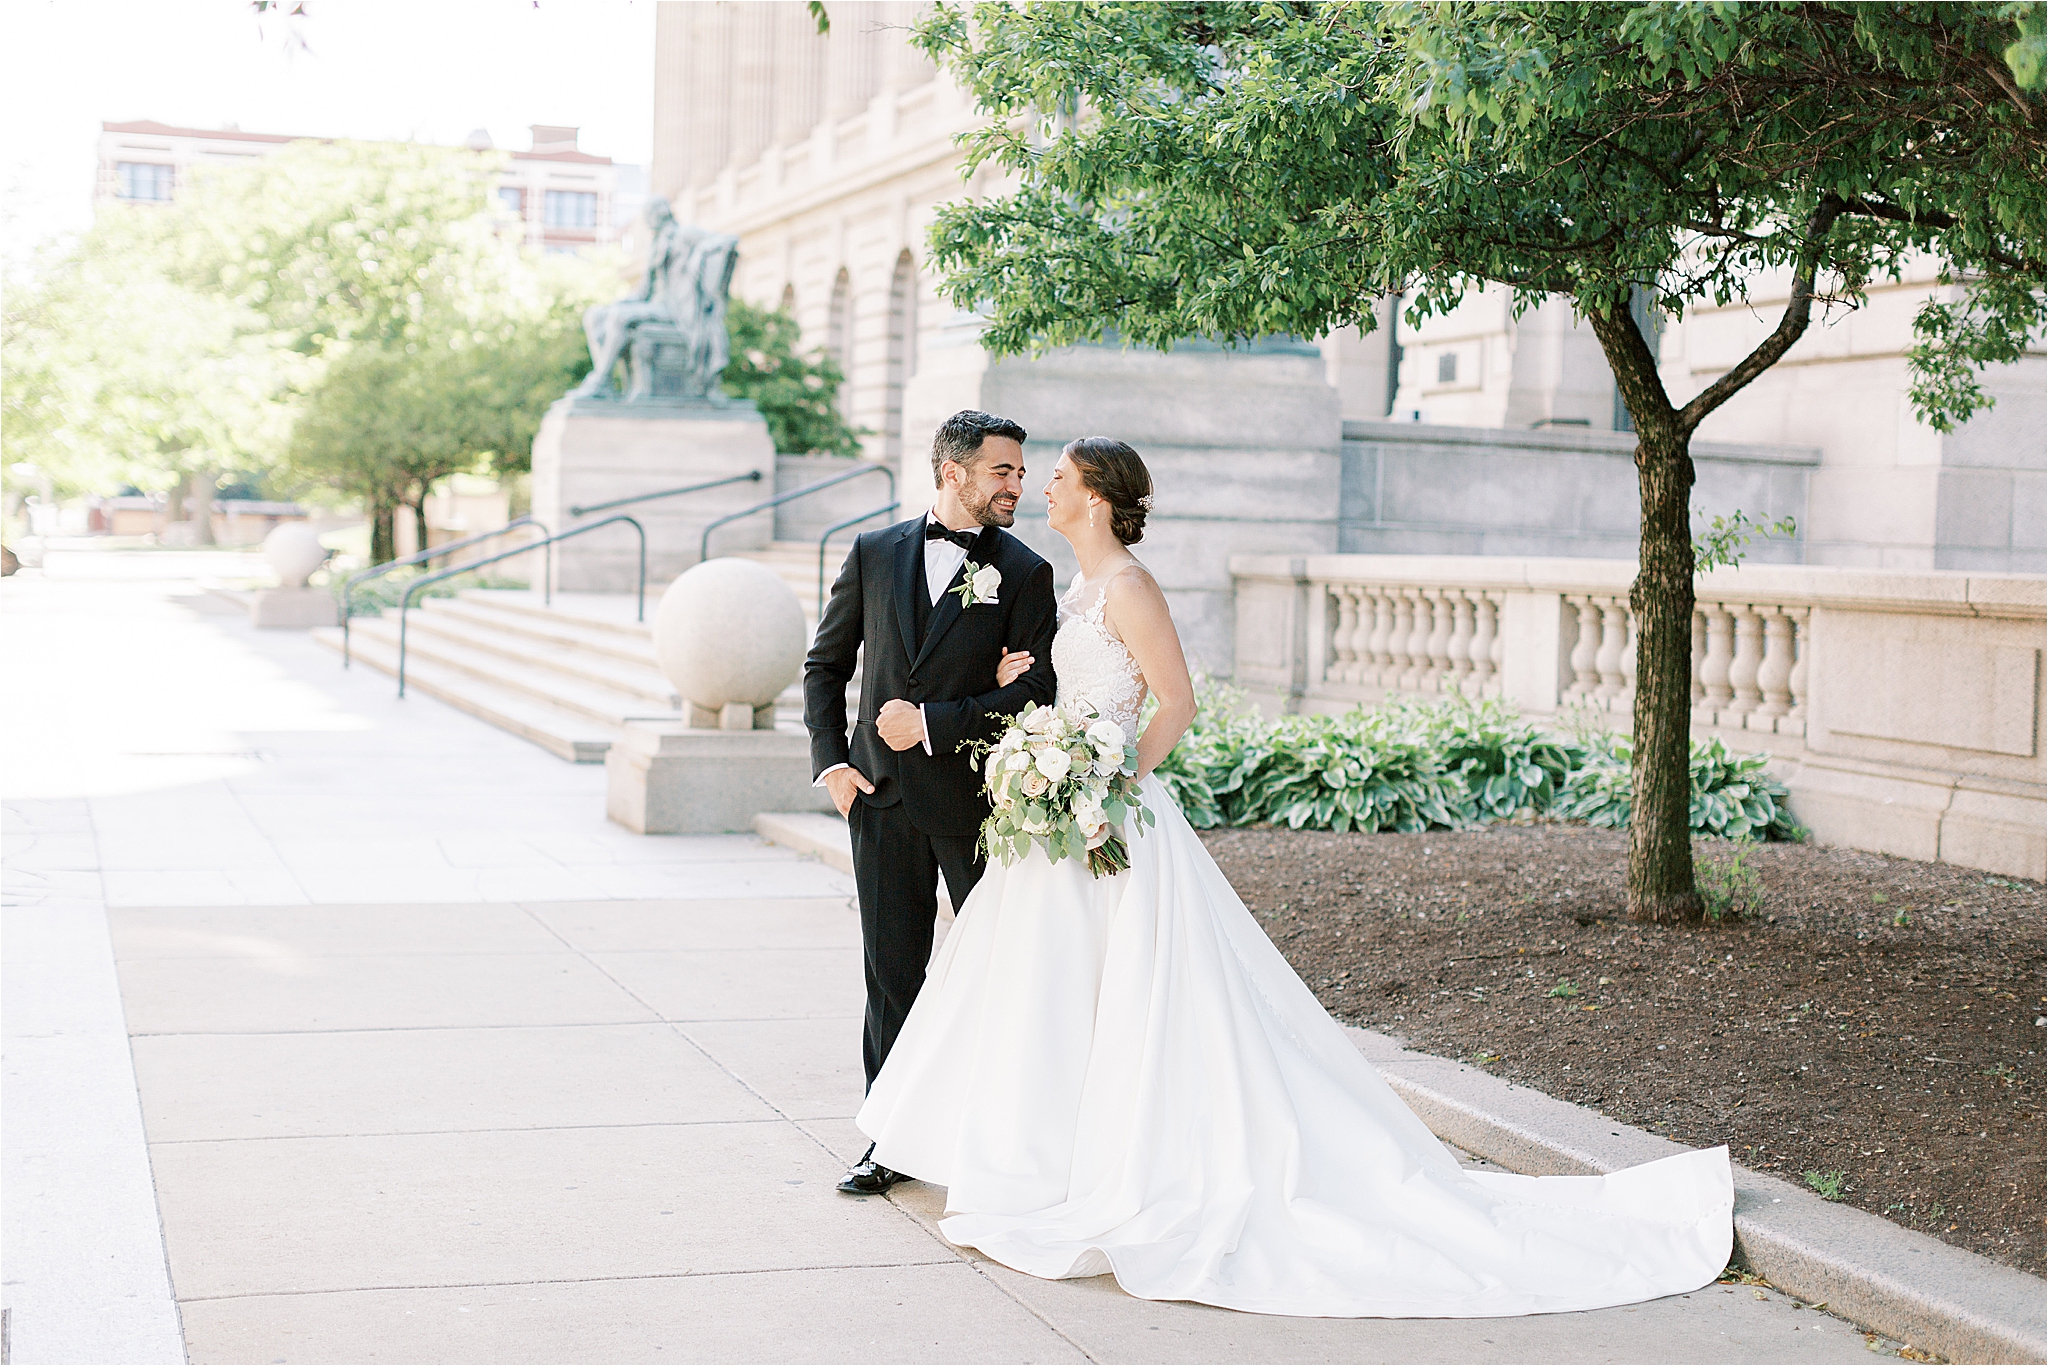 Bride and Groom at their Romantic Cleveland Wedding